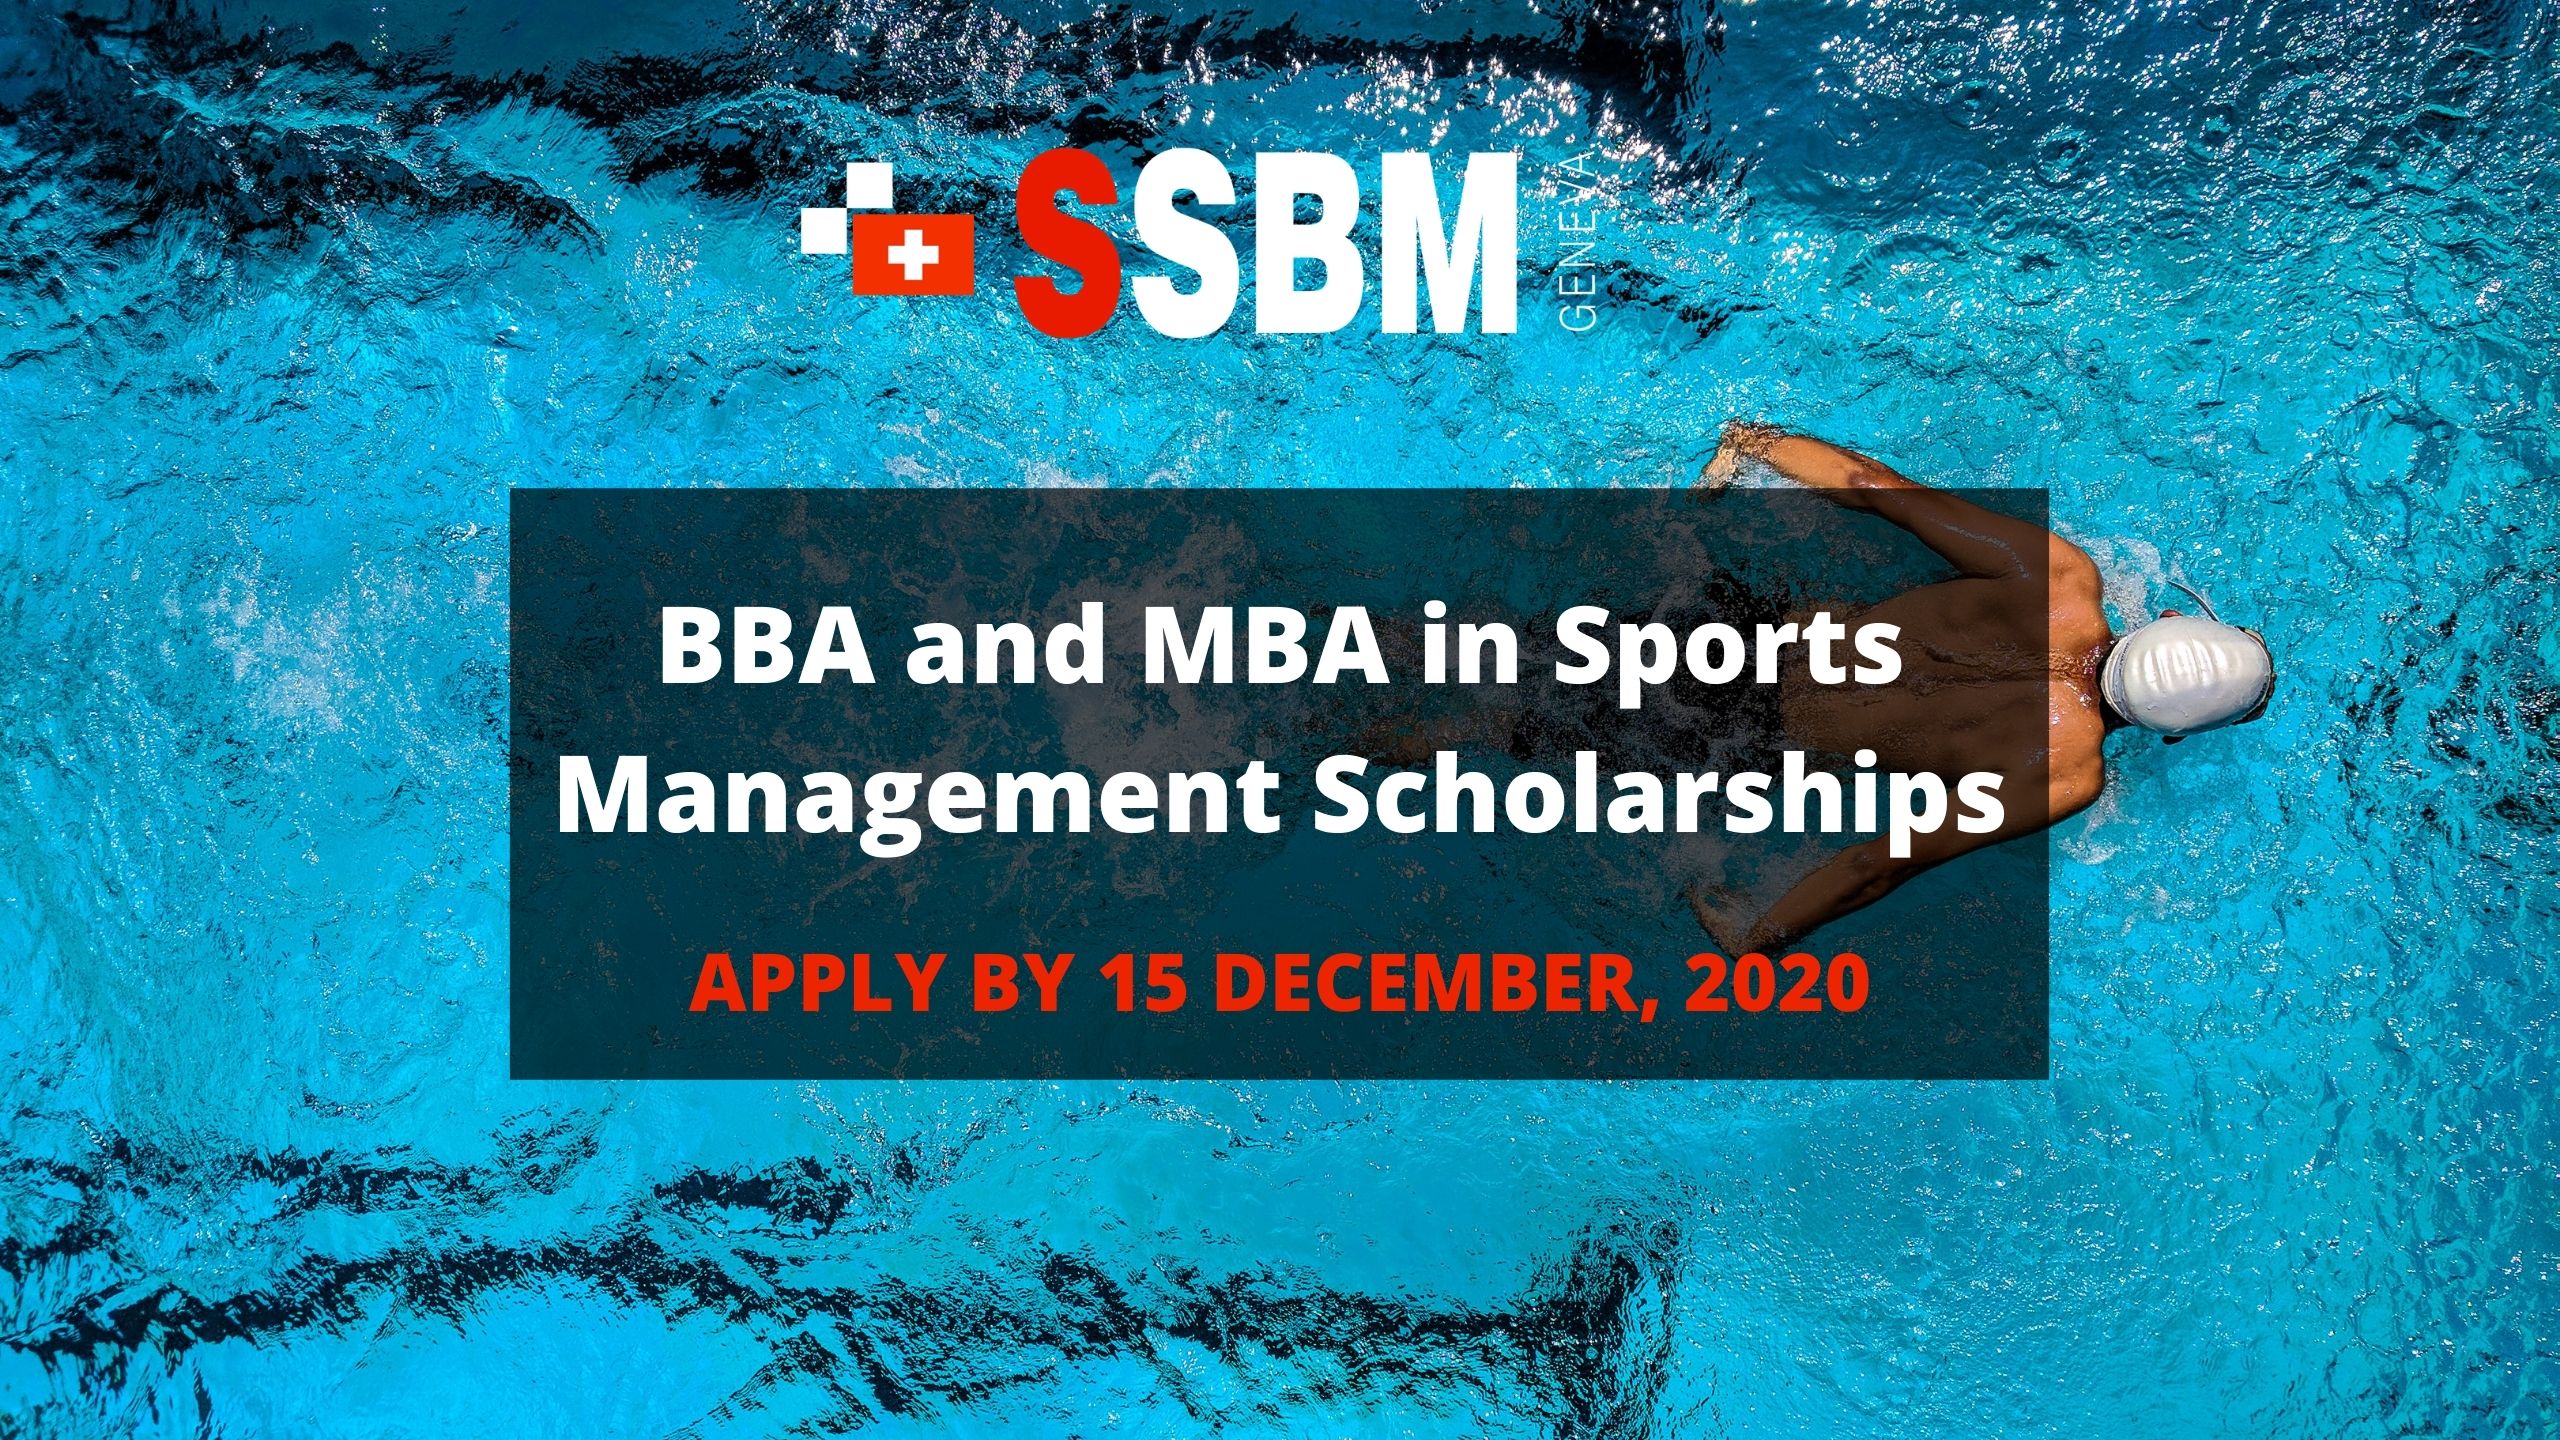 BBA and MBA in Sports Management Scholarships - Swiss School of